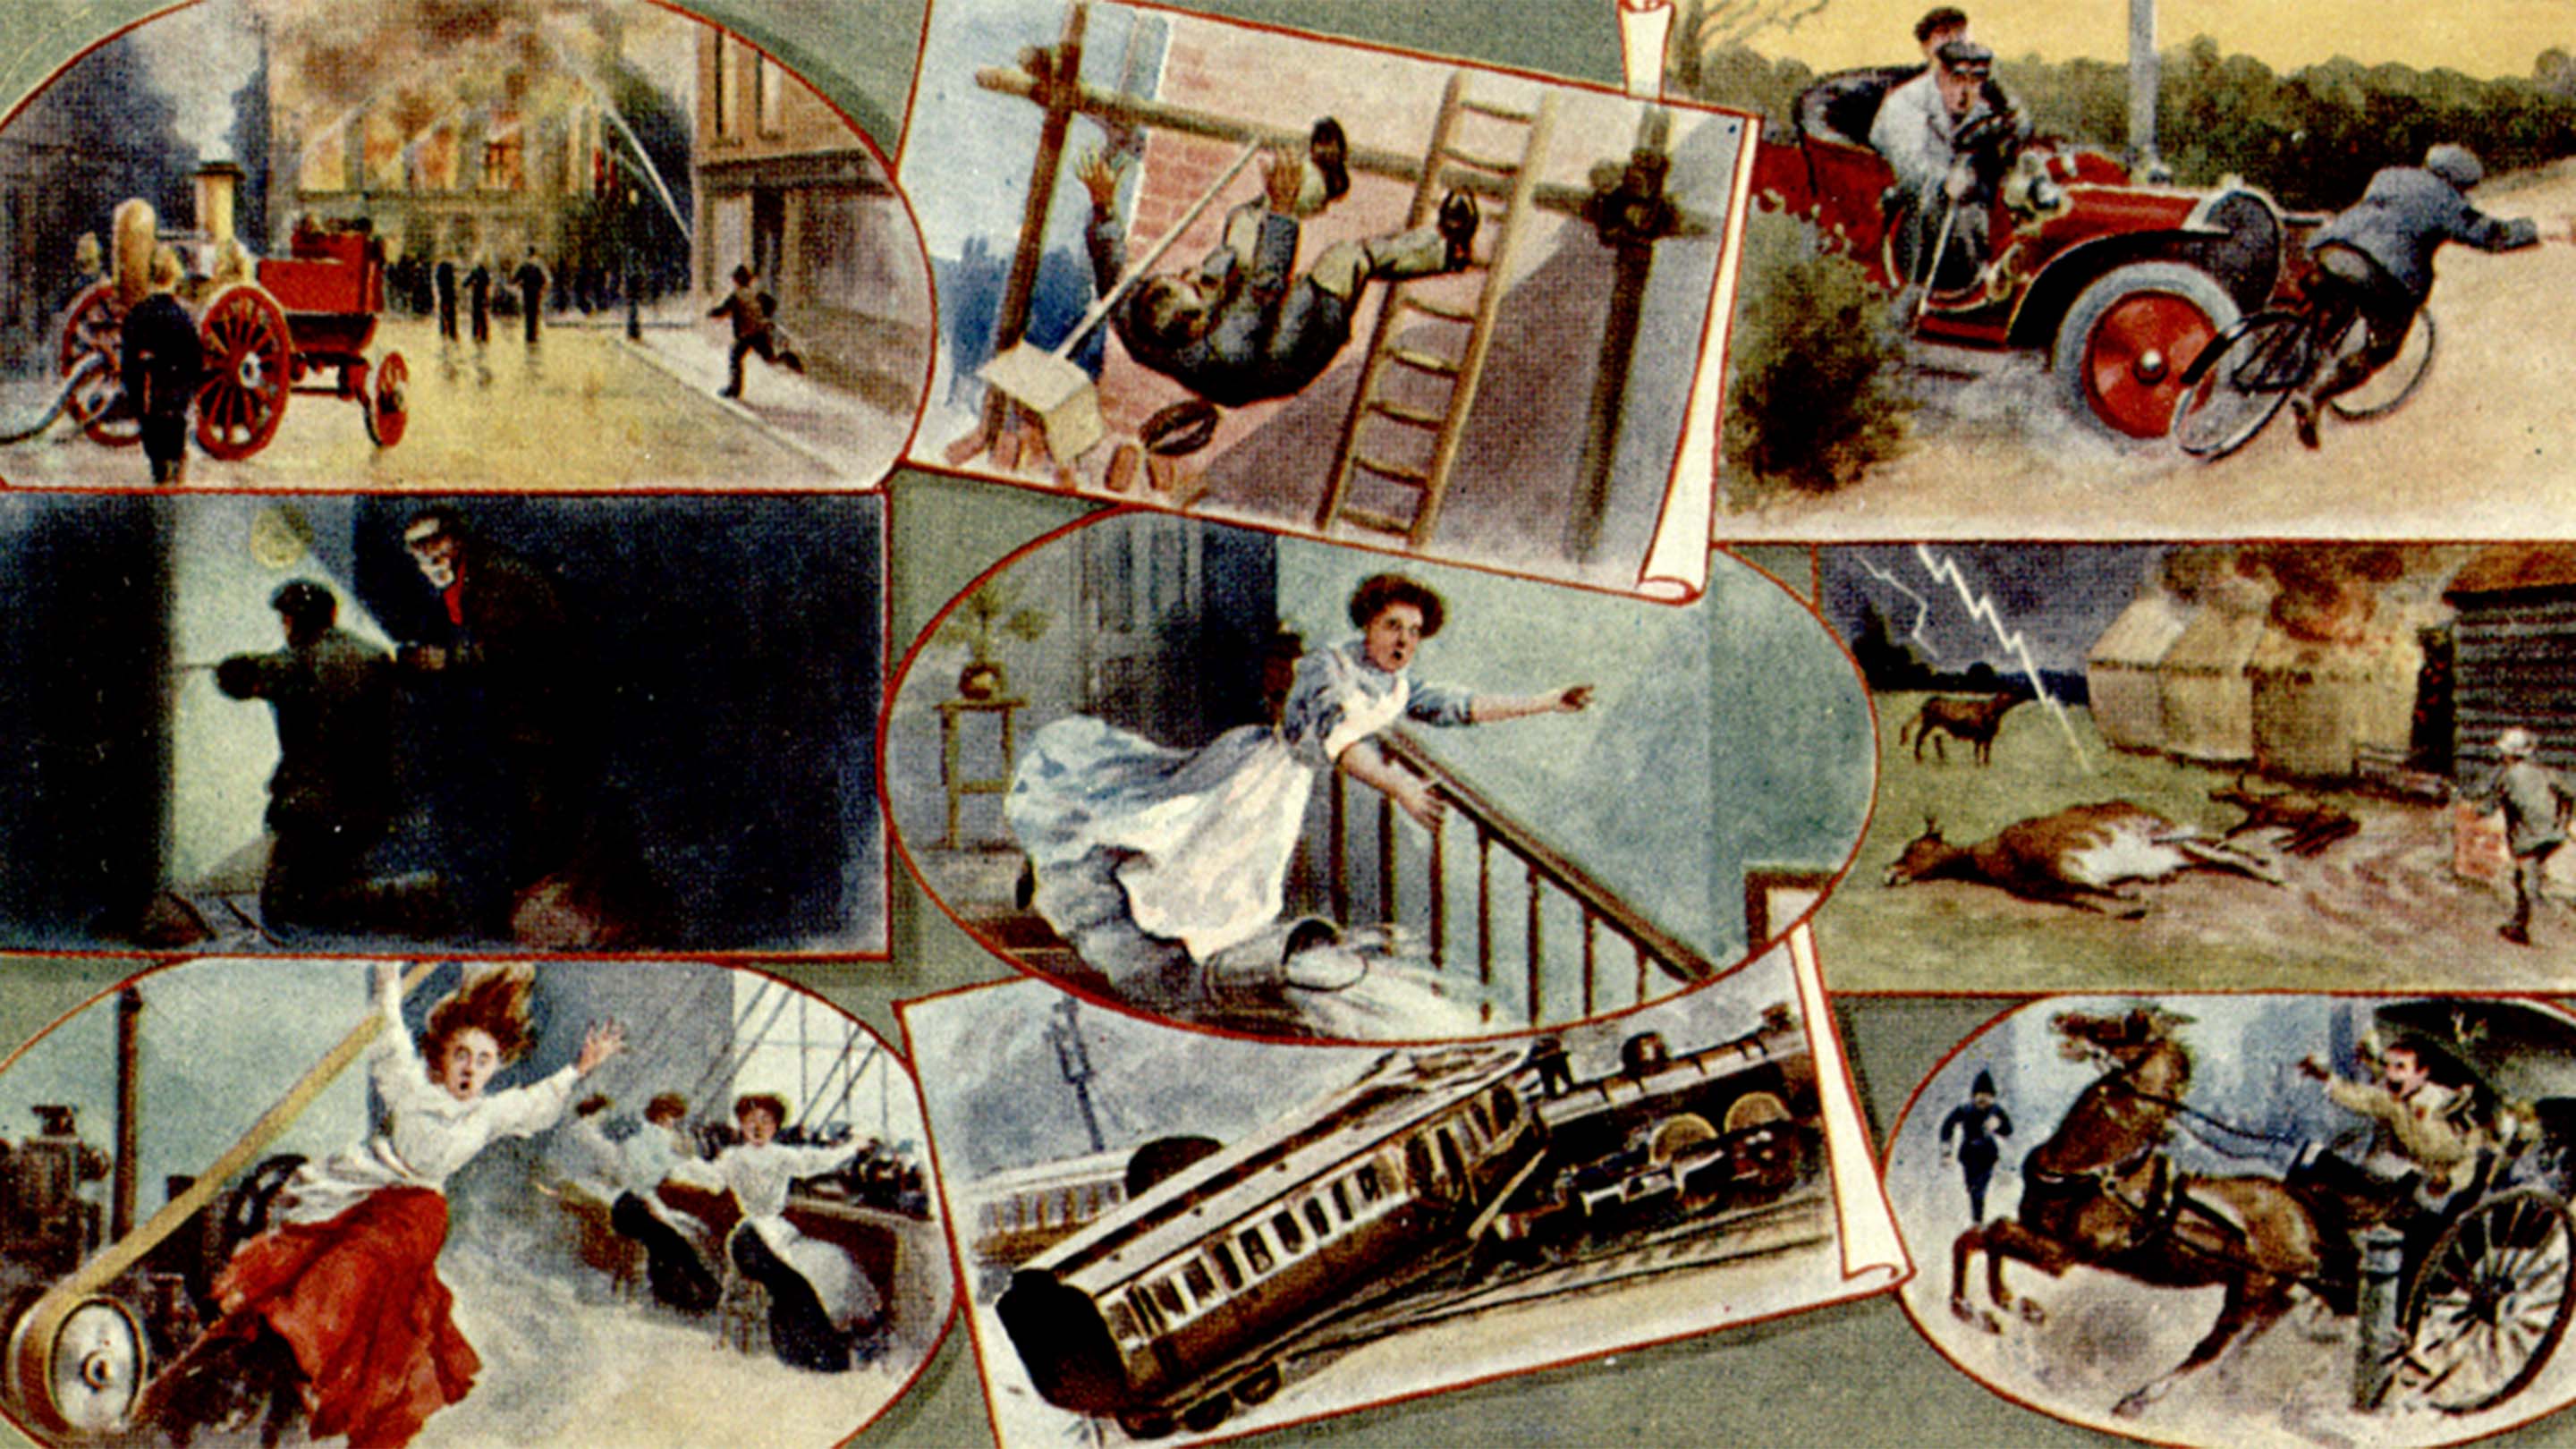 Old marketing poster showing hand-drawn illustrations of accidents and mishaps